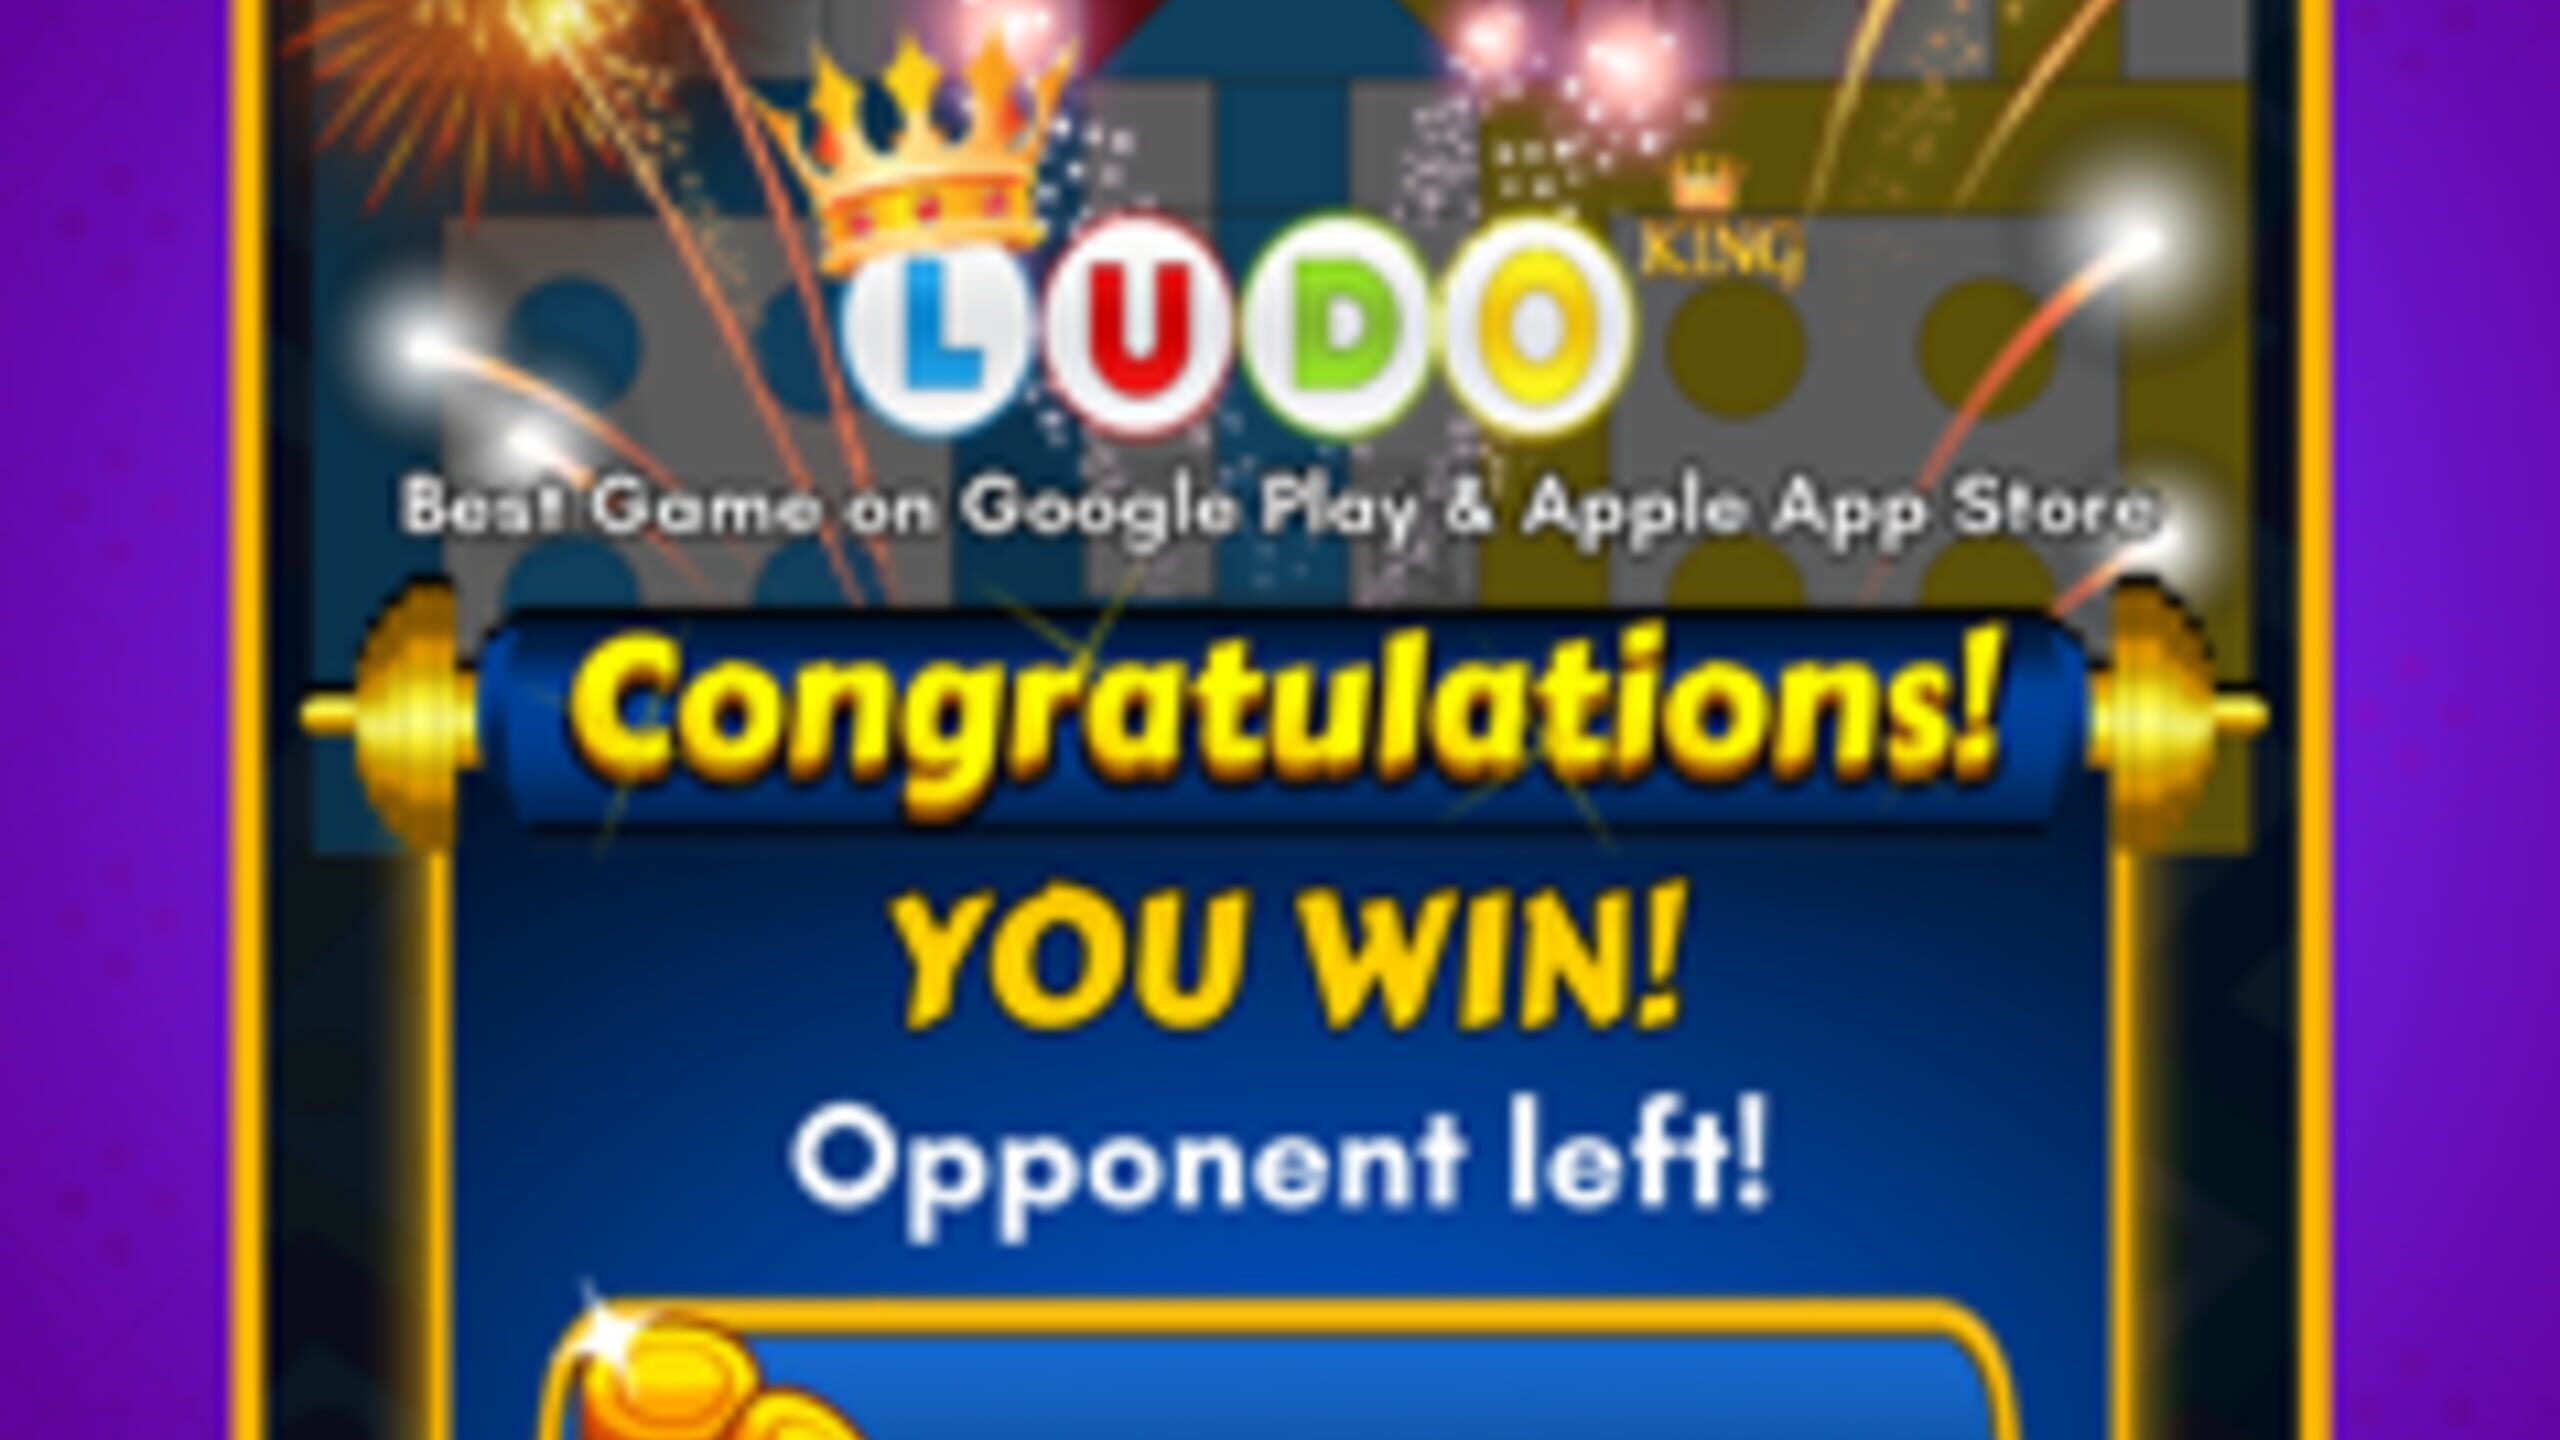 Post #274 — LUDO KING GROUP ONLINE (@online_ludo_king_group_ncr)